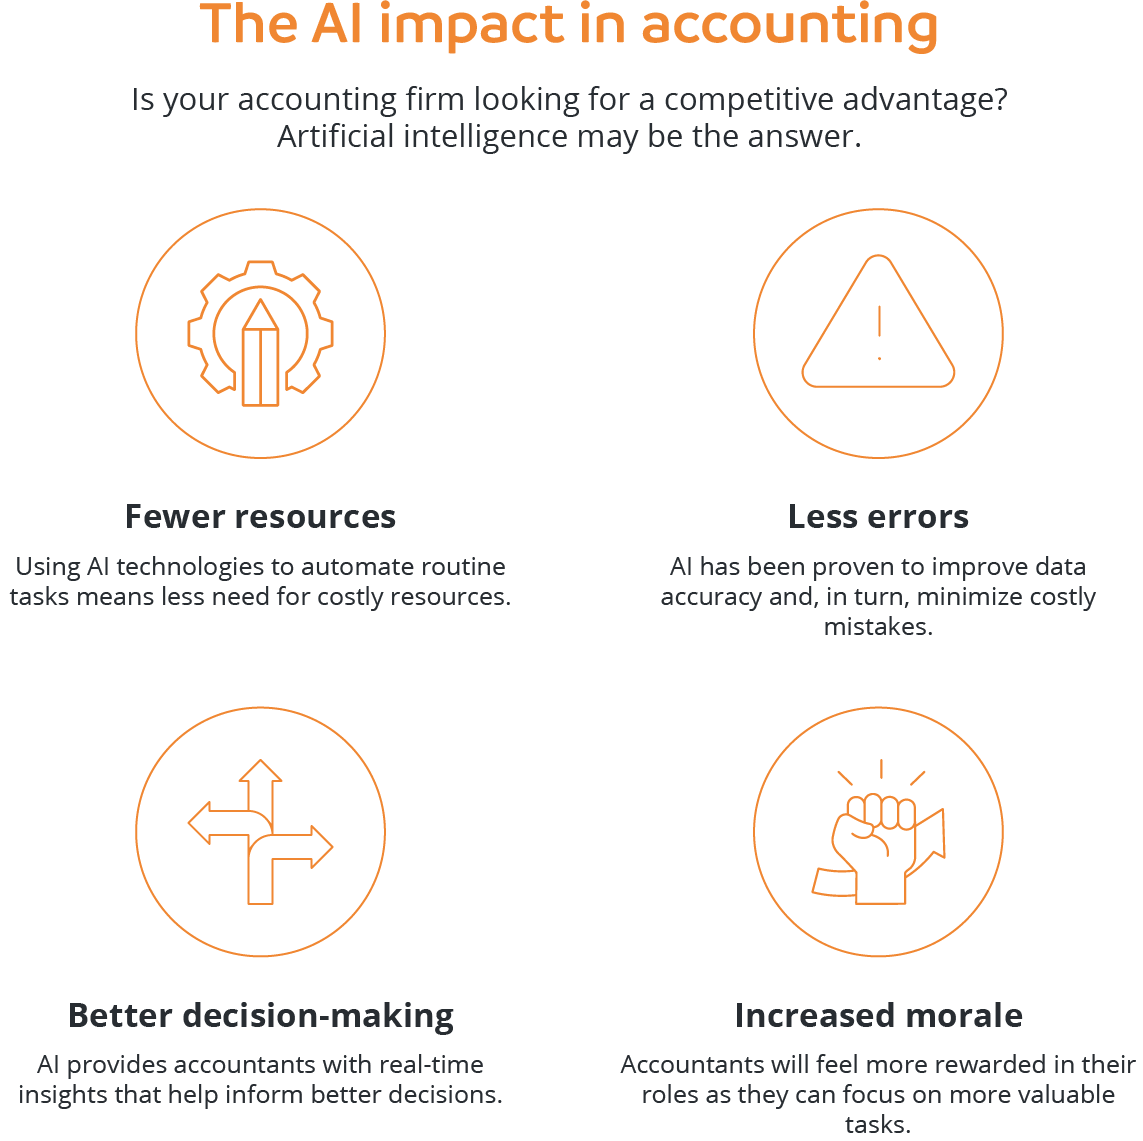 The AI impact in accounting